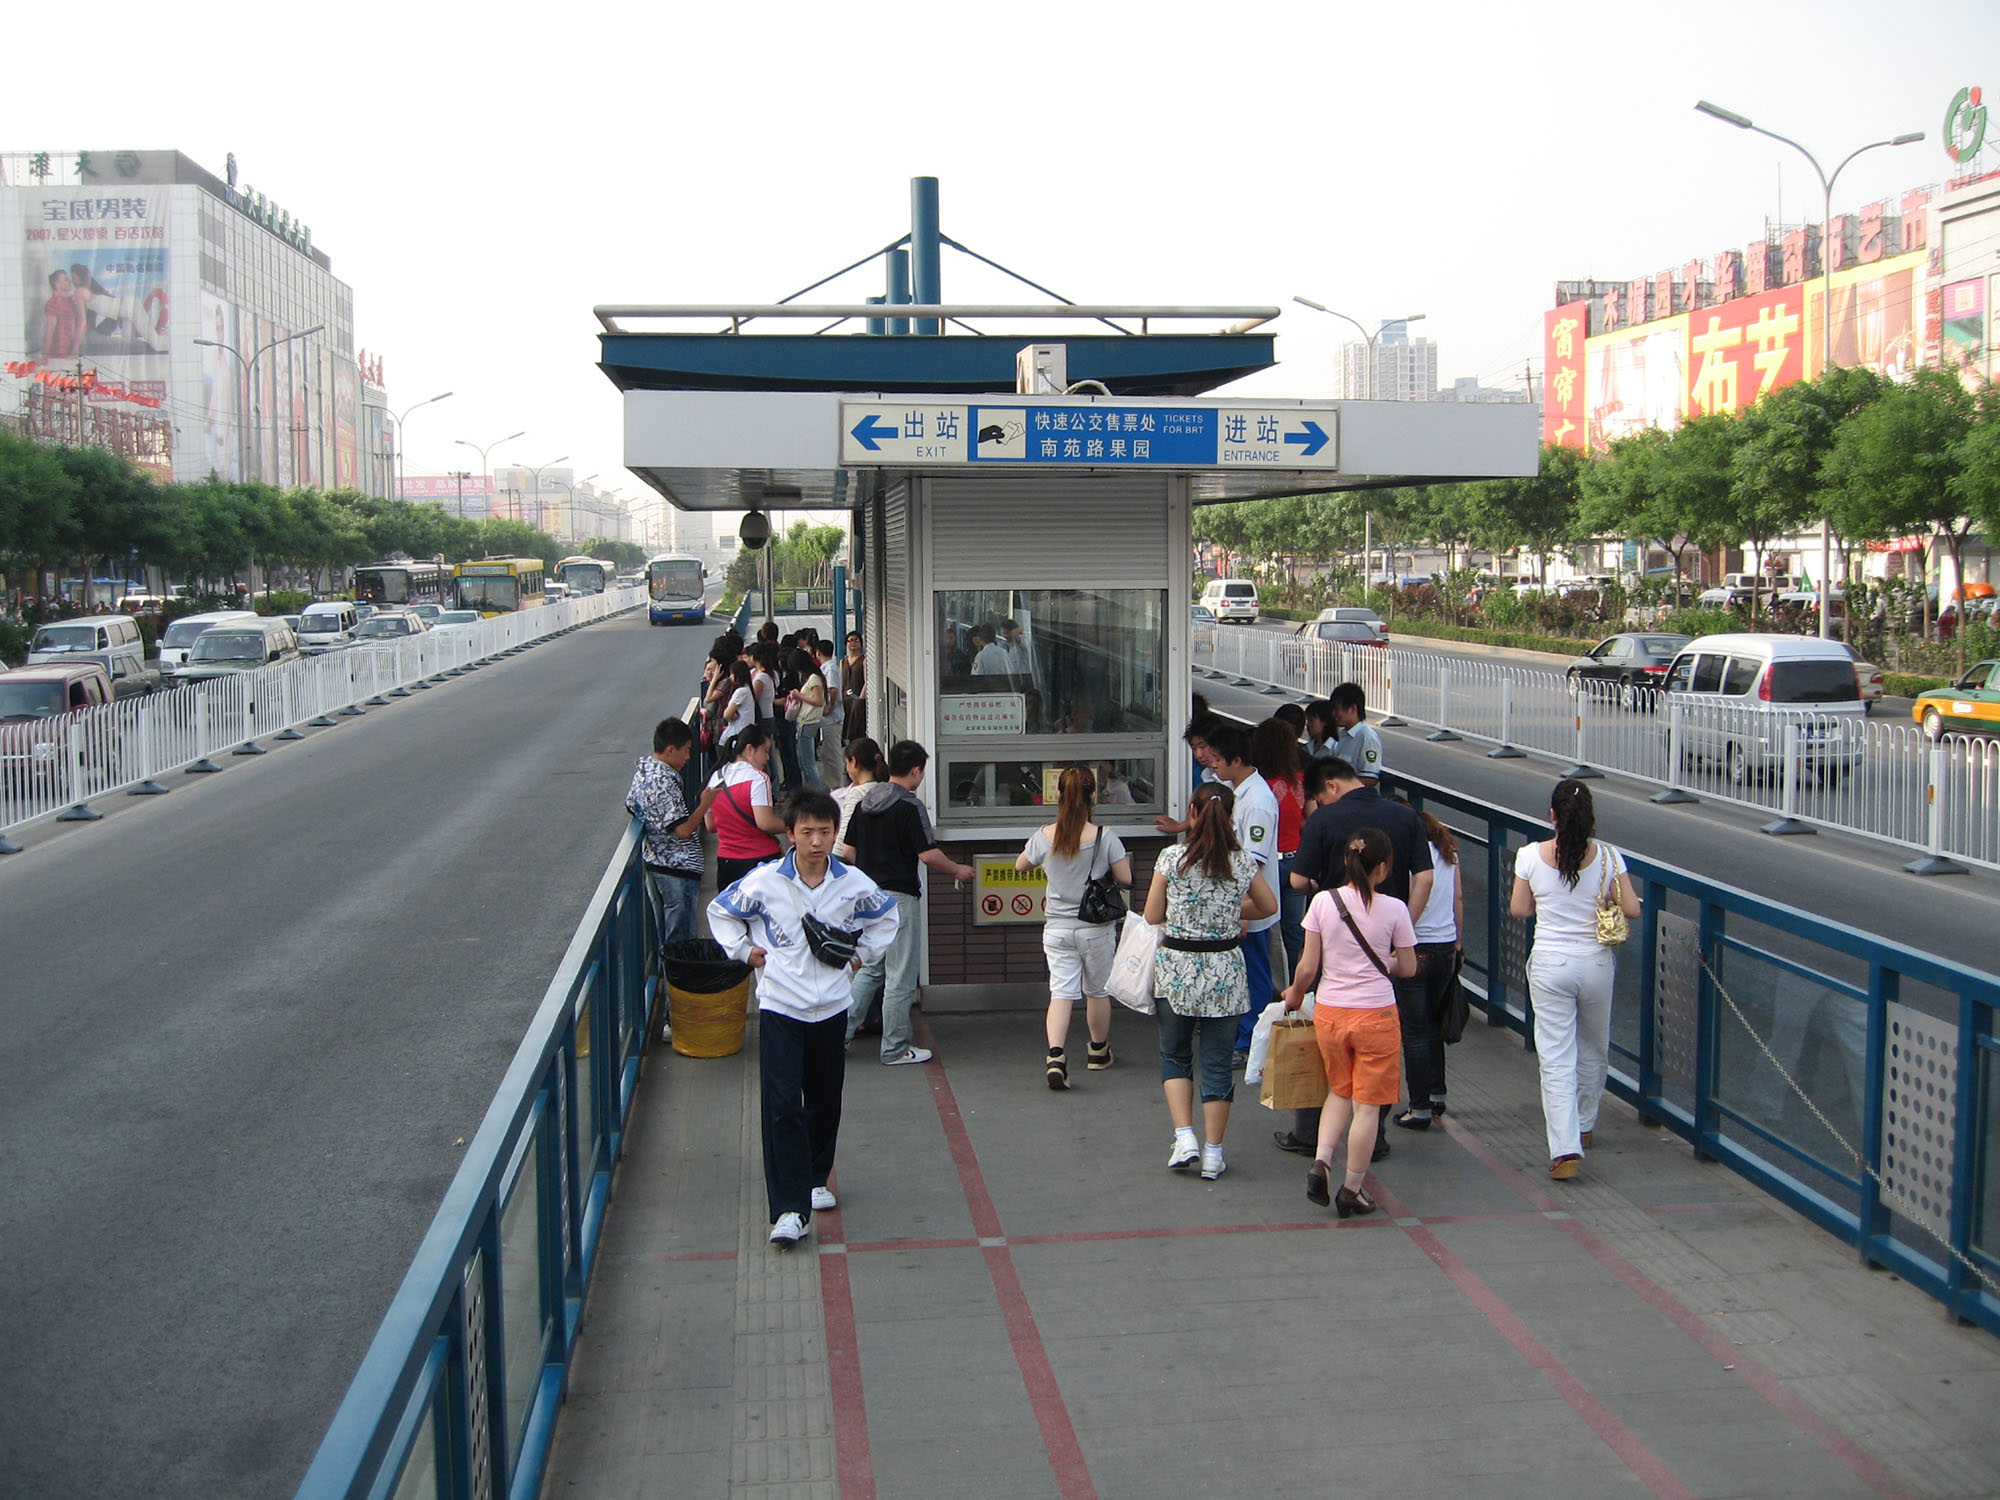 Fig. 18.1 Off-board fare collection system in Beijing.